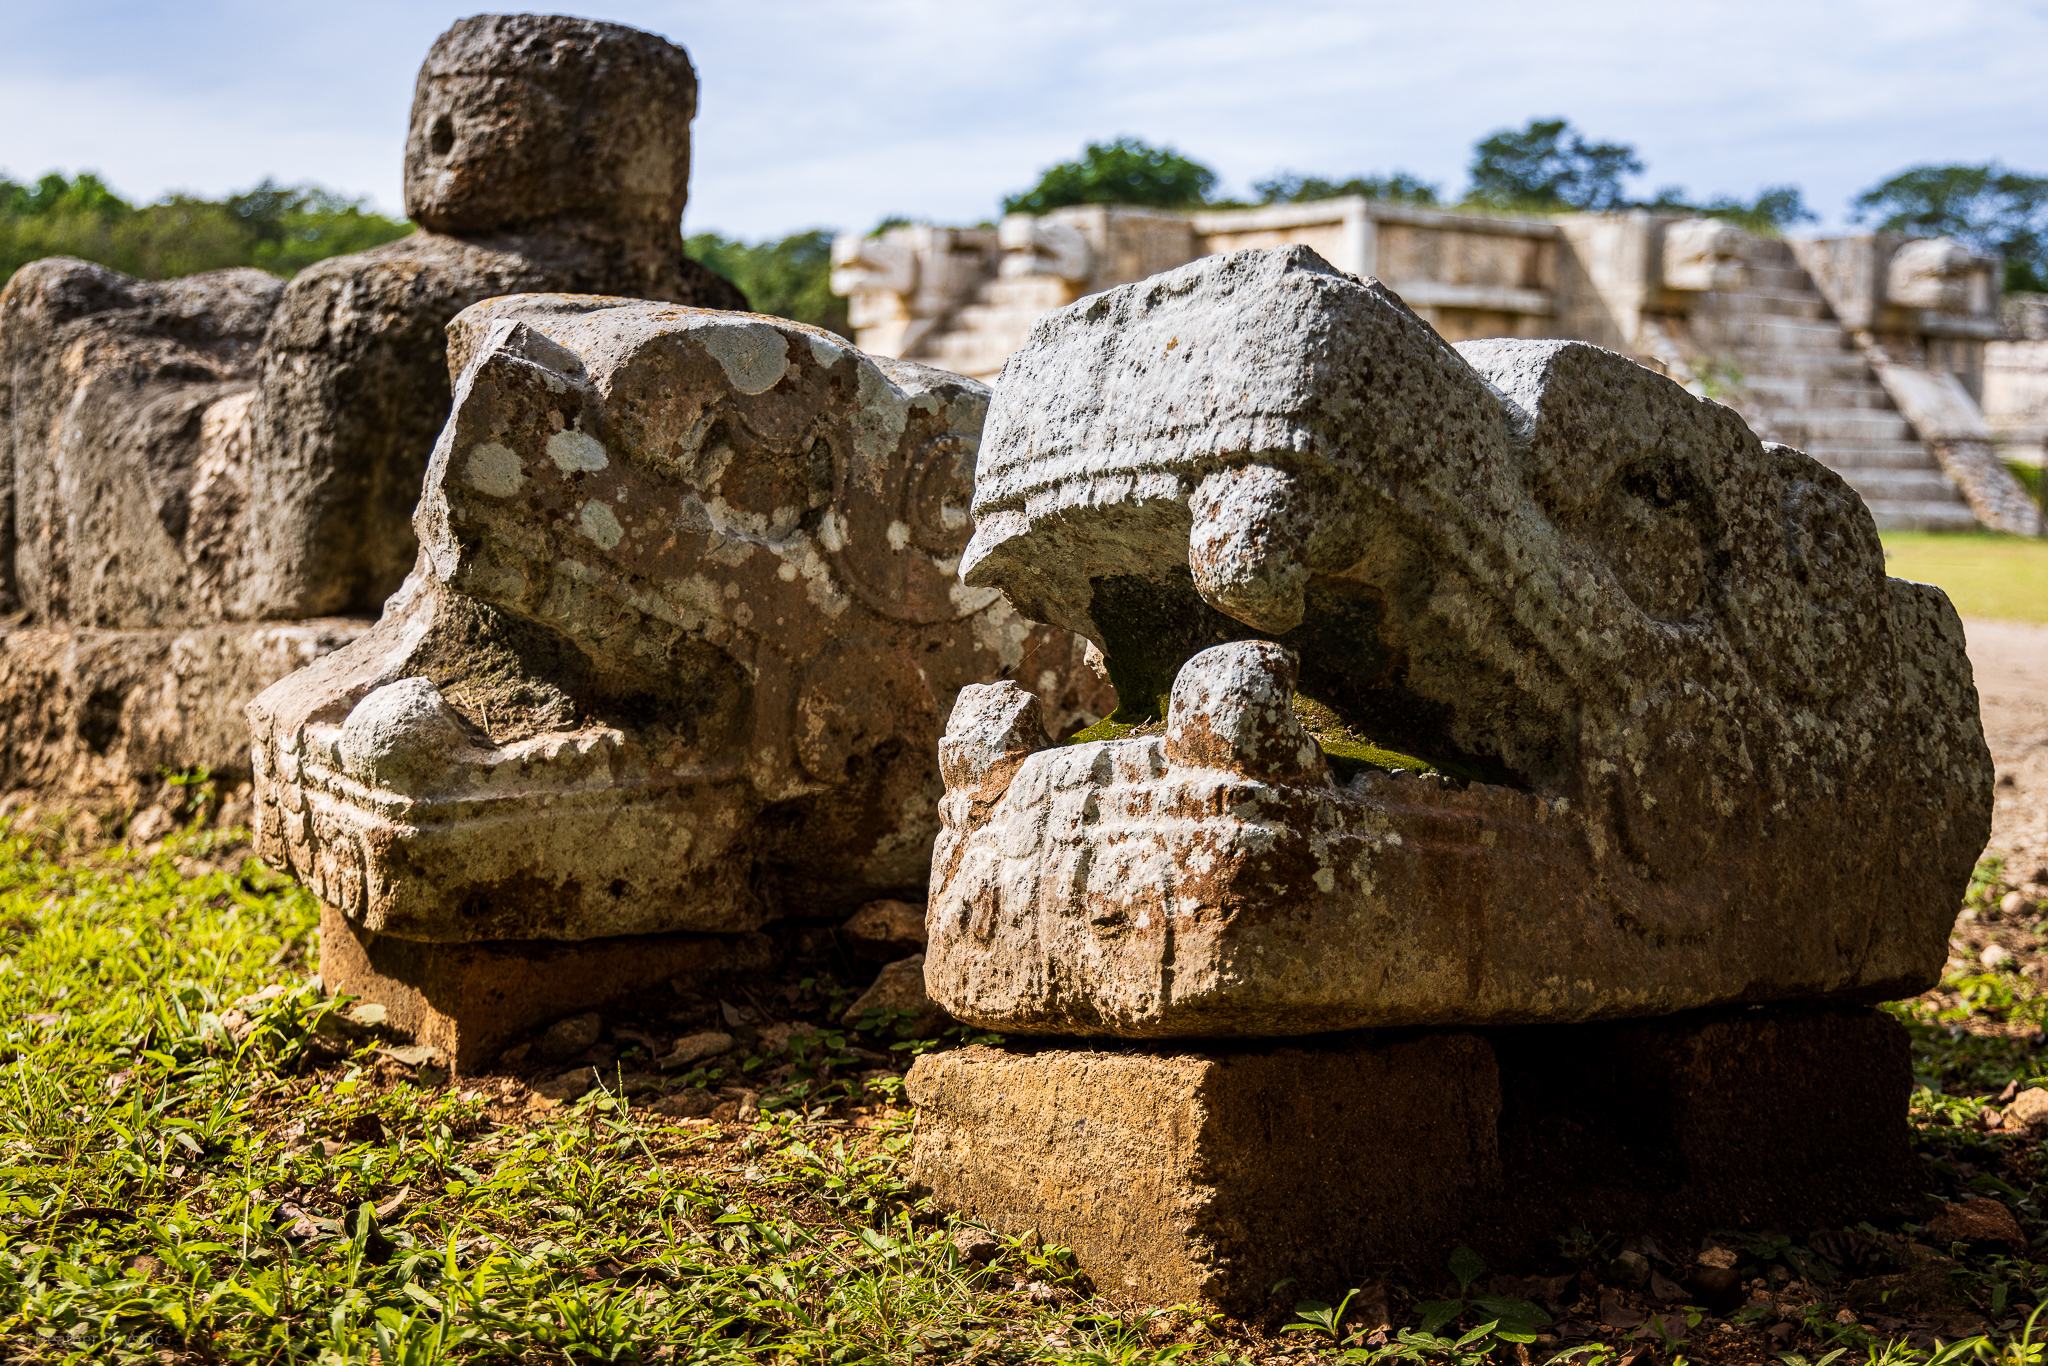 A detailed view of the serpent head sculptures at the base of the Kukulkan Pyramid in Chichen Itza. These carved stone heads represent the Mayan serpent deity, with the temple's grand staircase in the background.